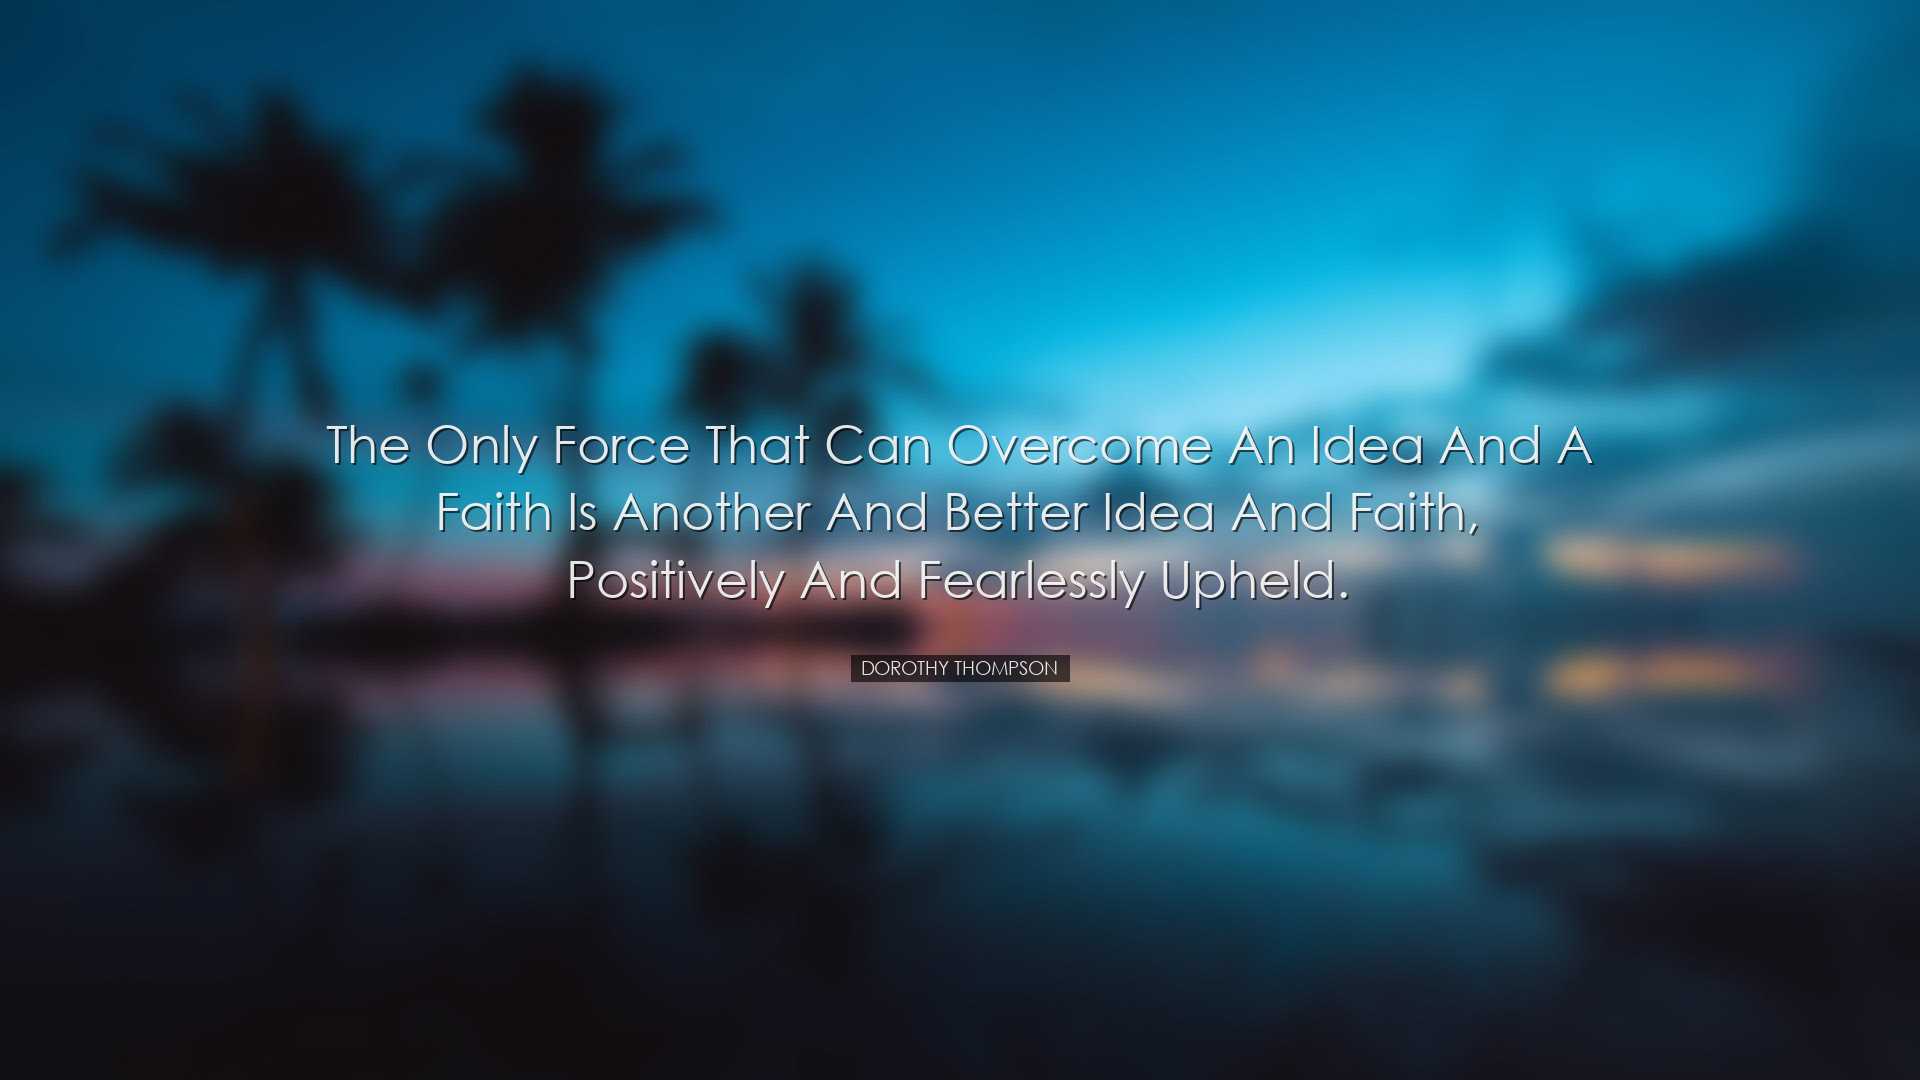 The only force that can overcome an idea and a faith is another an